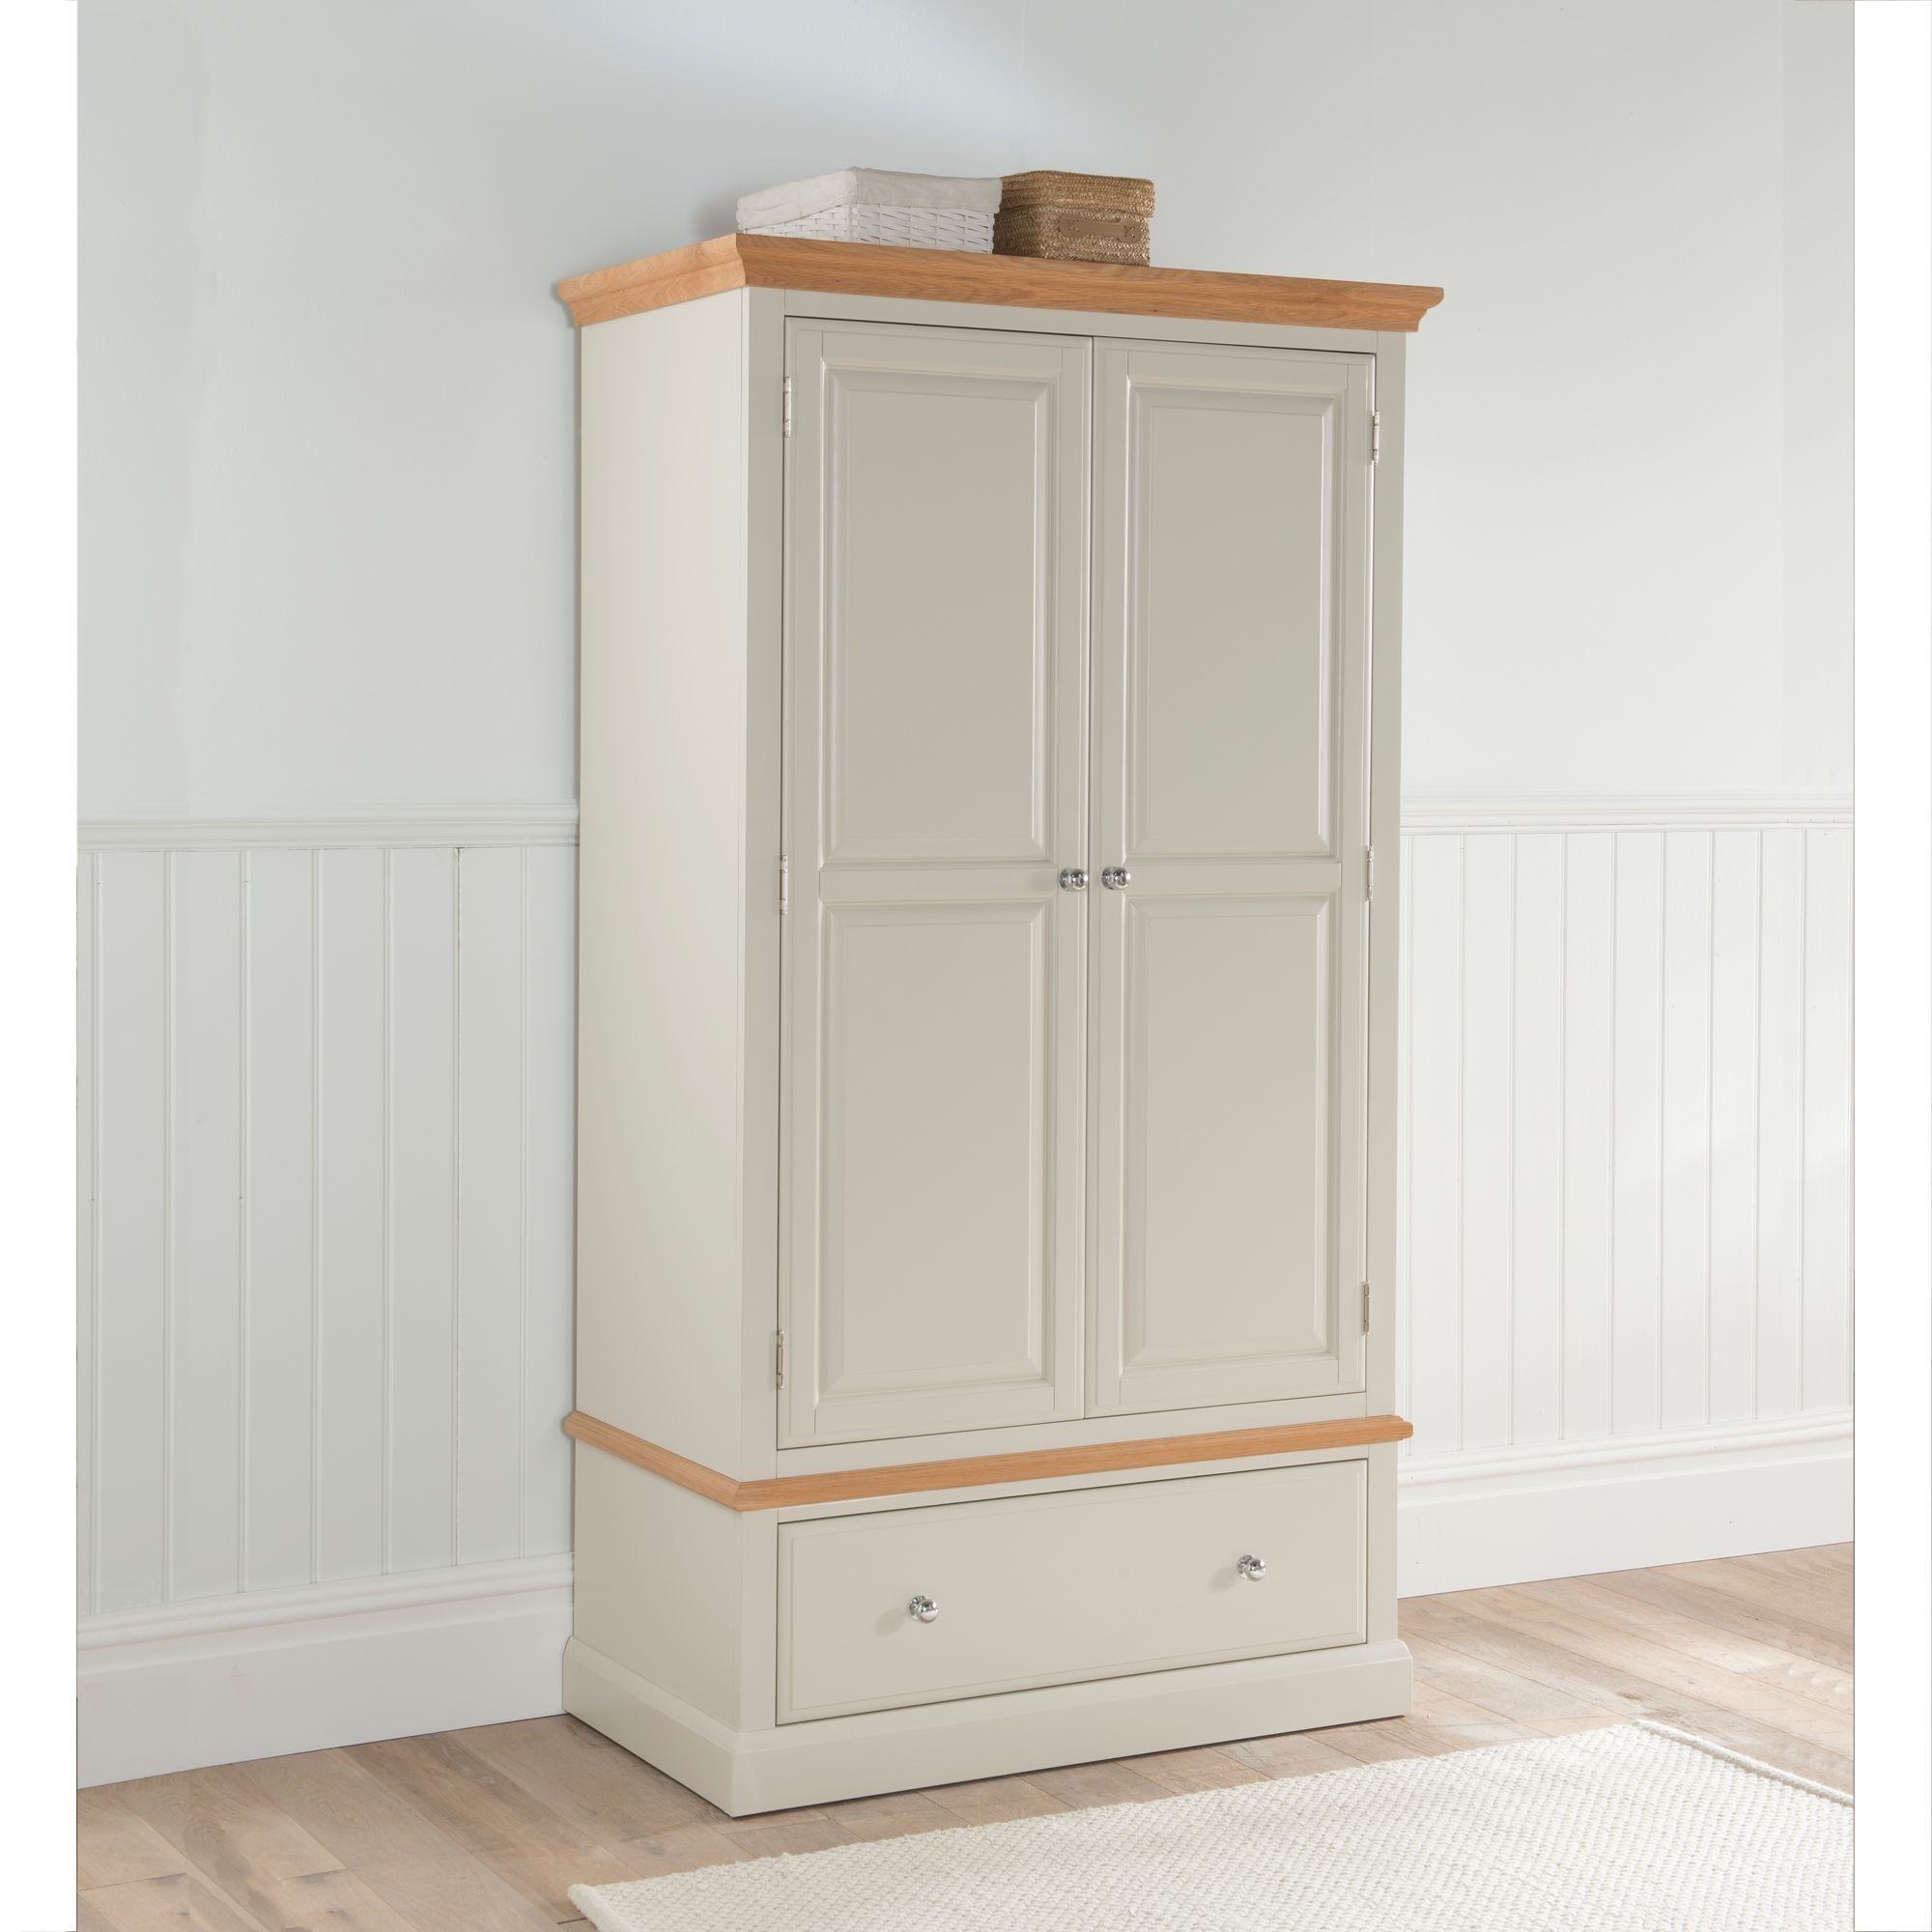 Remi Shabby Chic Wardrobe | Online From Homesdirect365 Throughout Shabby Chic Wardrobes For Sale (View 2 of 15)